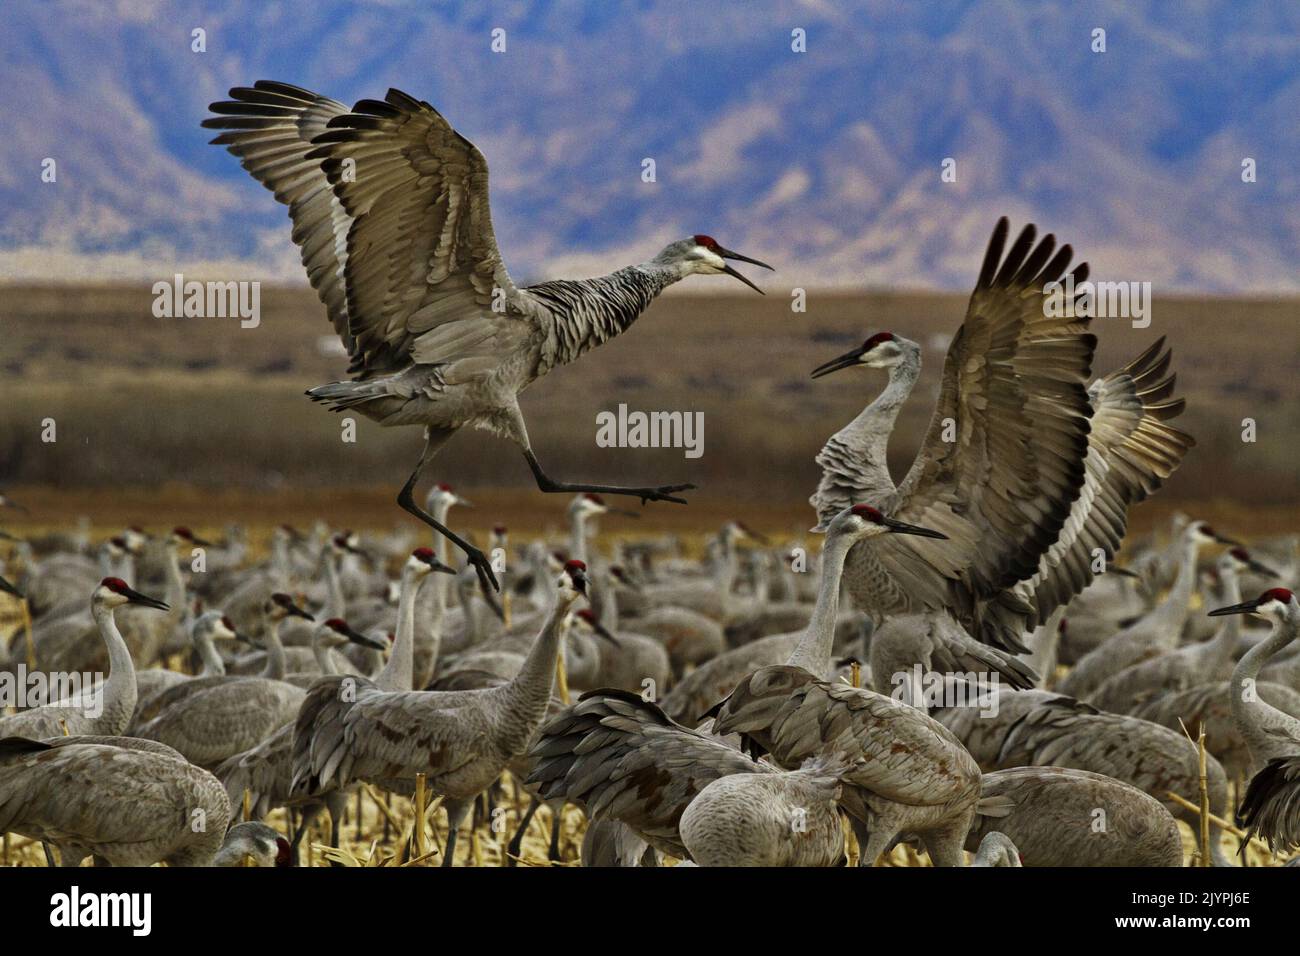 Leaping fight between Sandhill Cranes in flock at Bernardo Wildlife Area in New Mexico Stock Photo